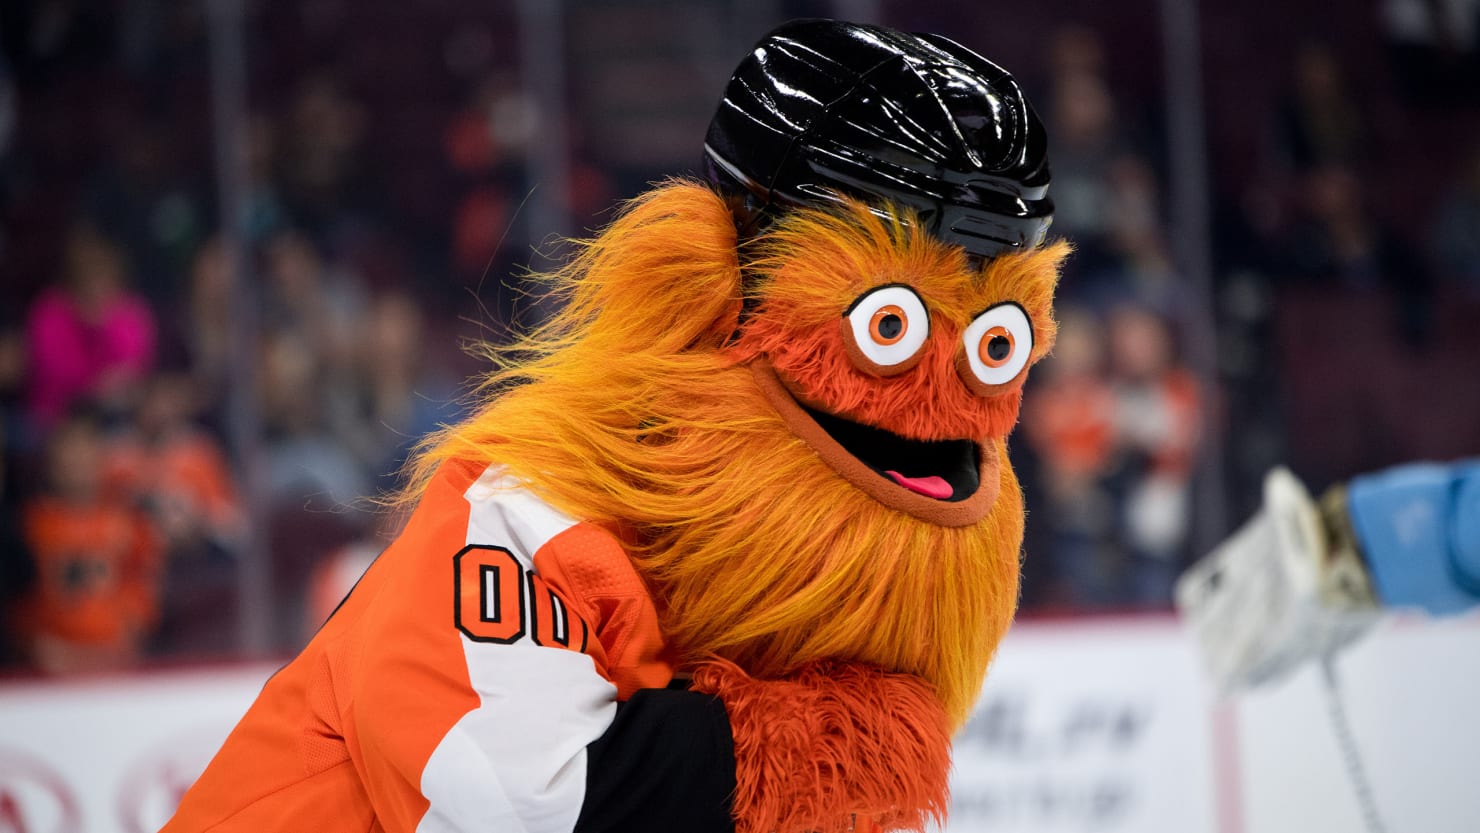 Gritty, Mr. Celery among most terrifying mascots, sports exec says